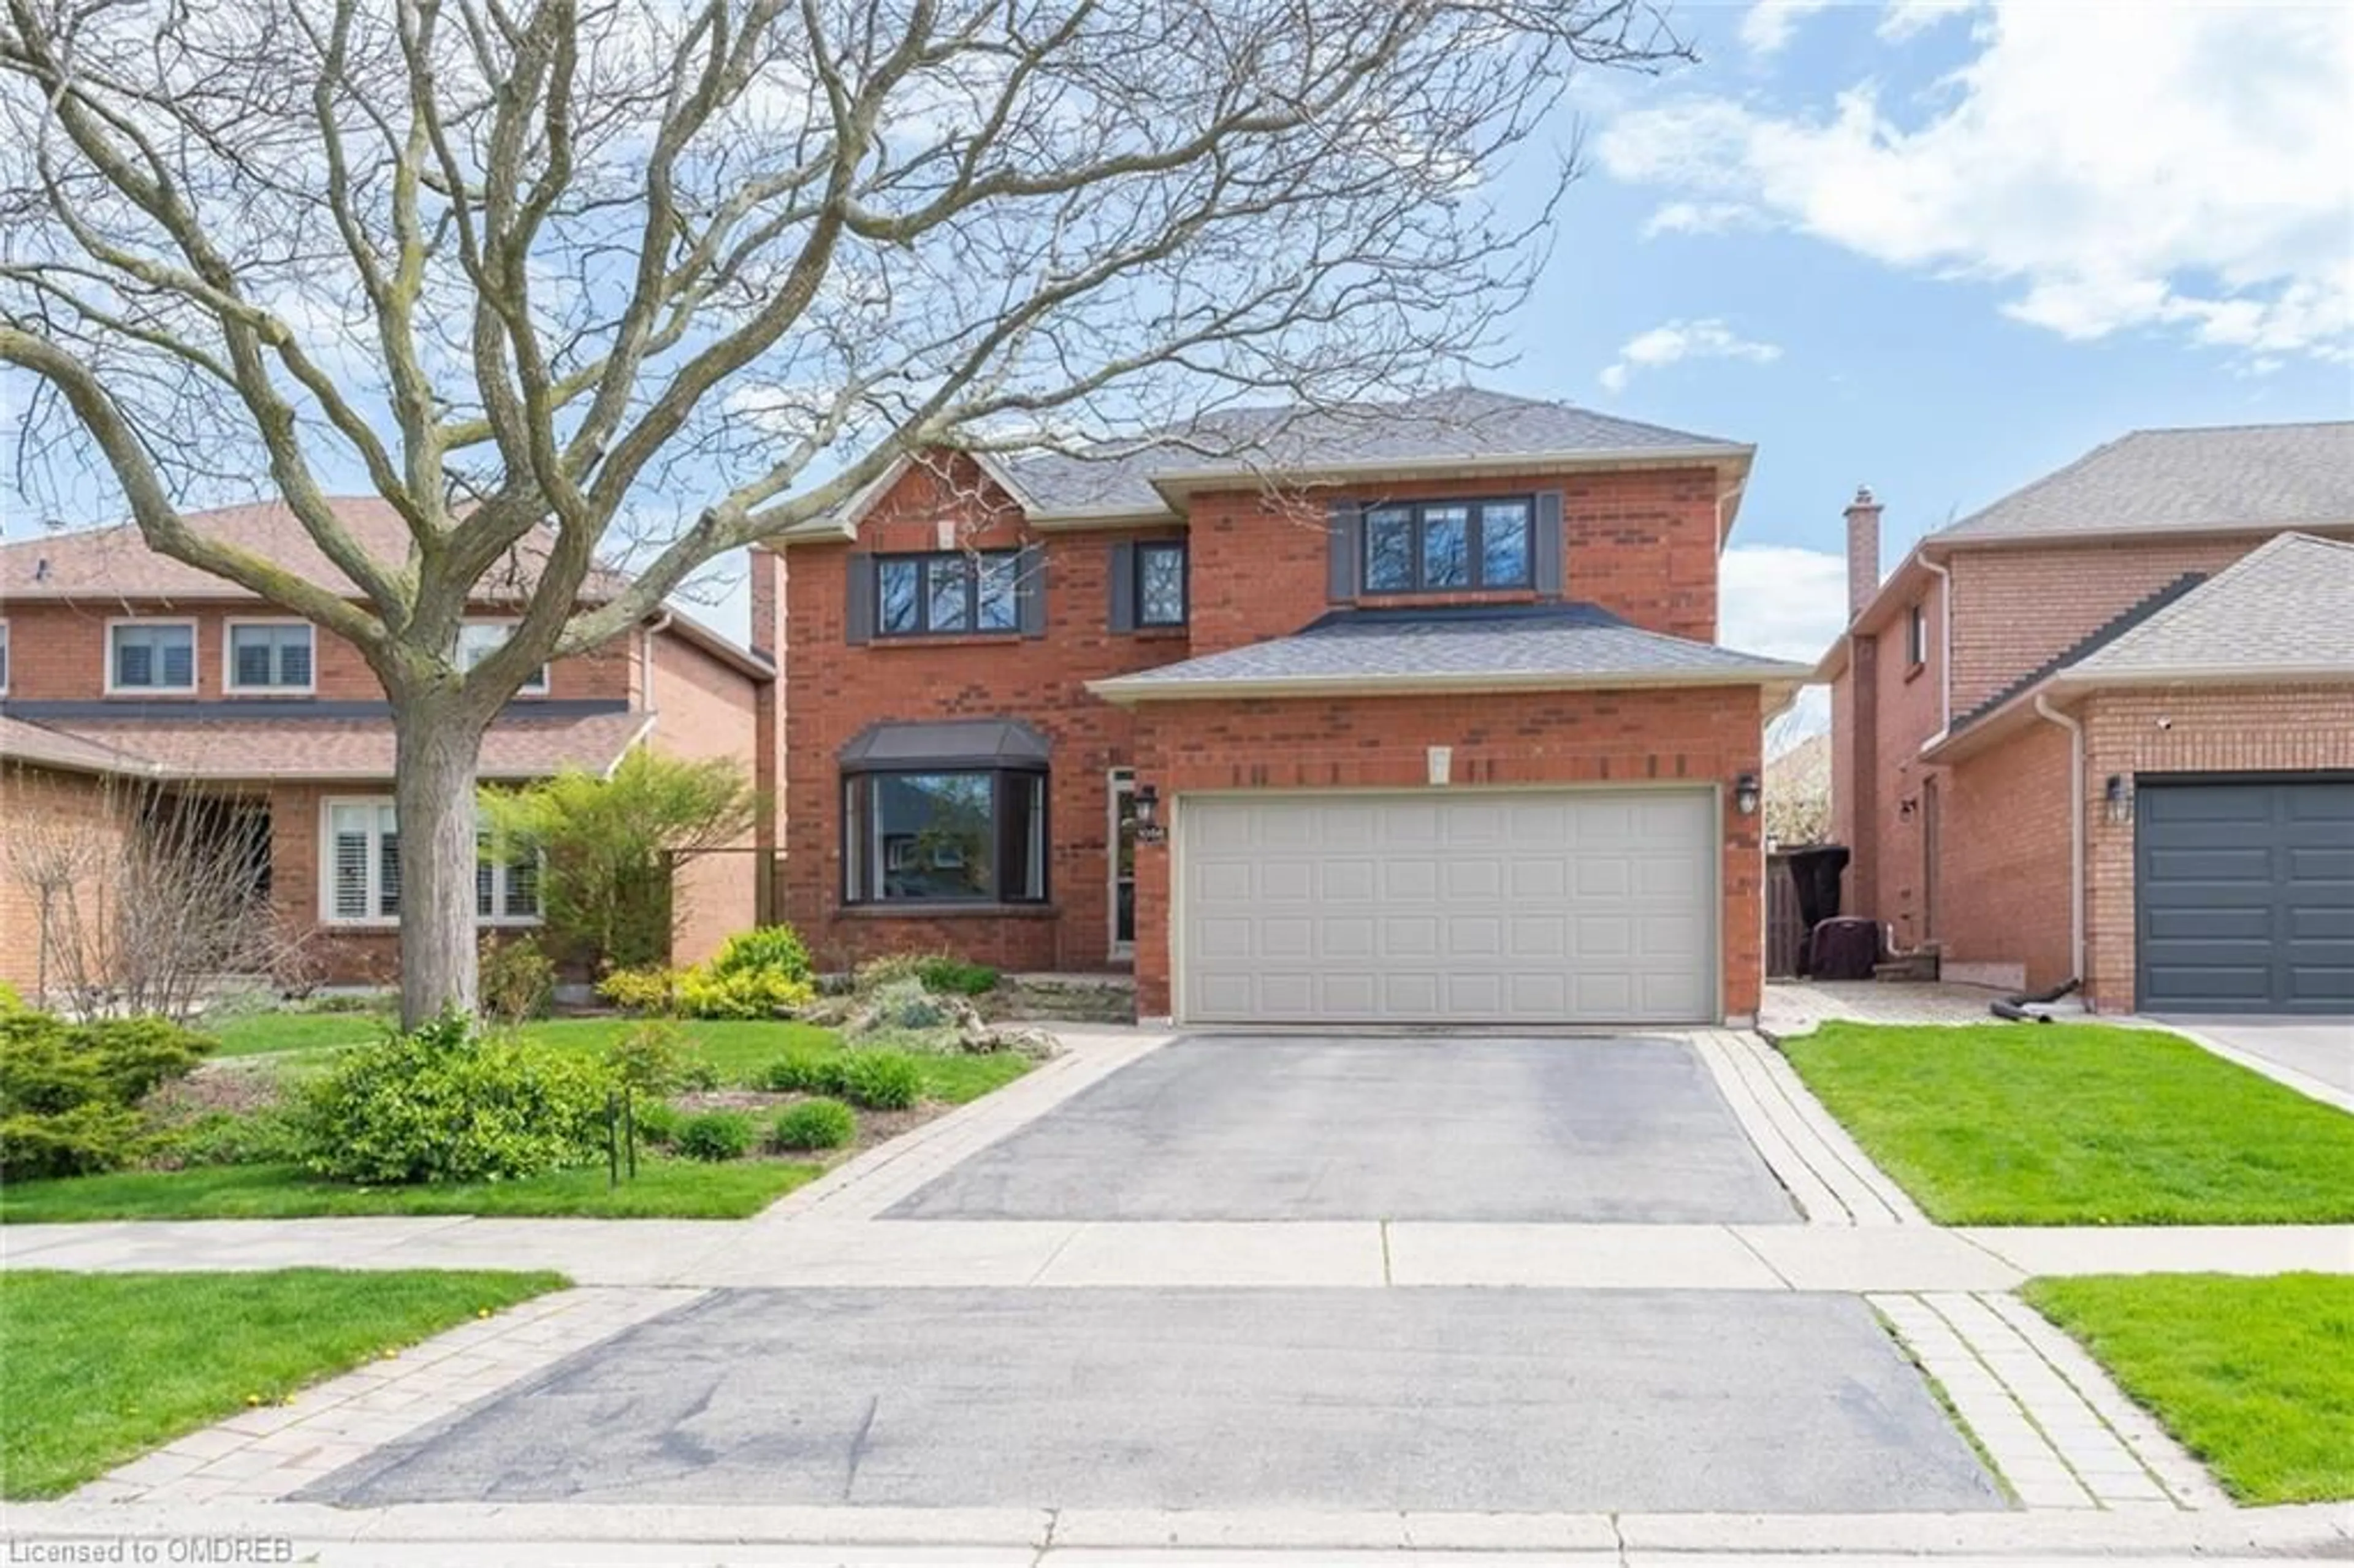 Home with brick exterior material for 1056 Grandeur Cres, Oakville Ontario L6H 4B5